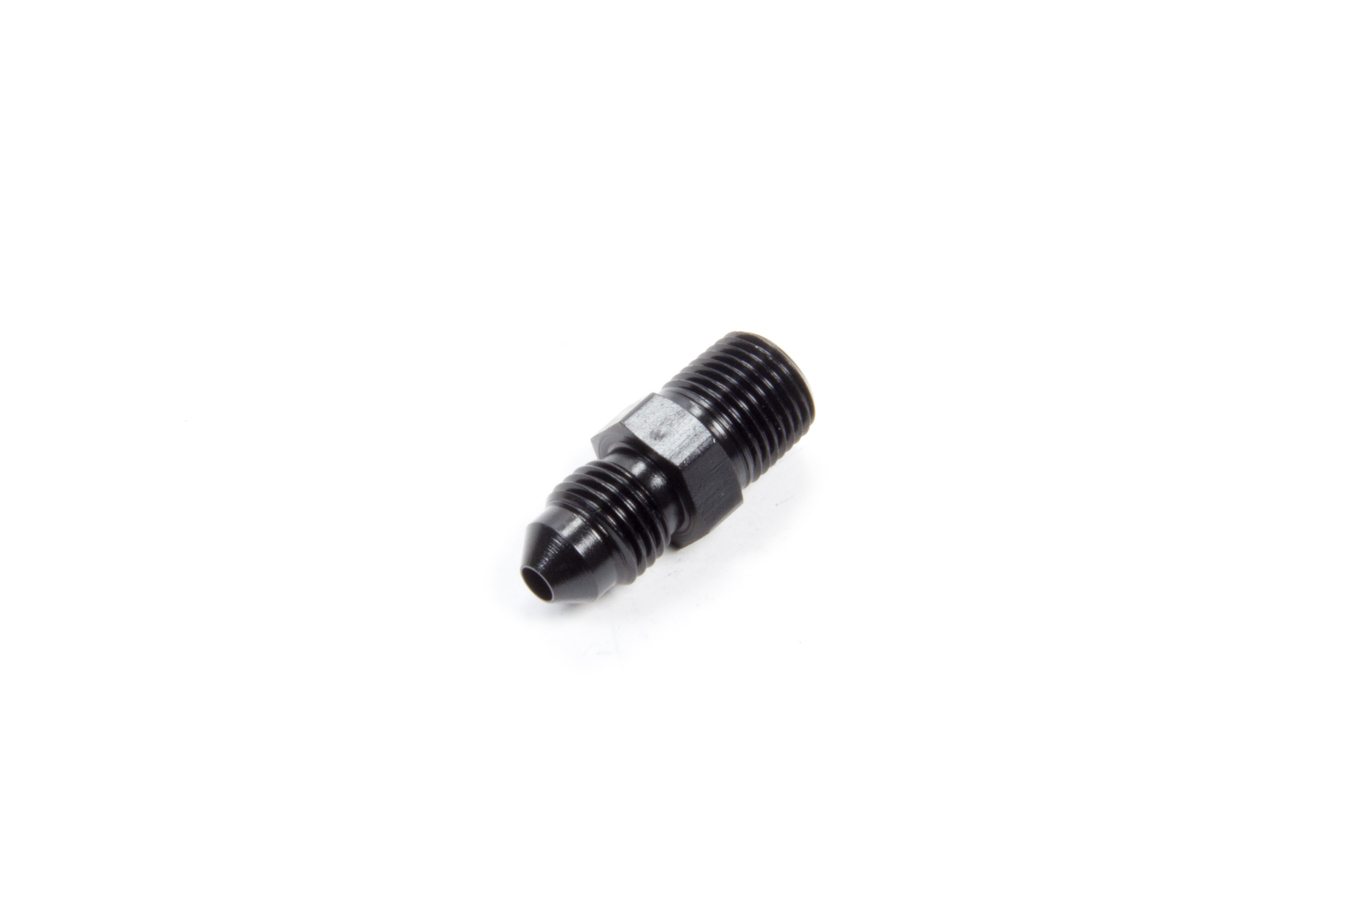 Aeroquip FCM5000 Fitting, Adapter, Straight, 3 AN Male to 1/8 in NPT Male, Aluminum, Black Anodized, Each